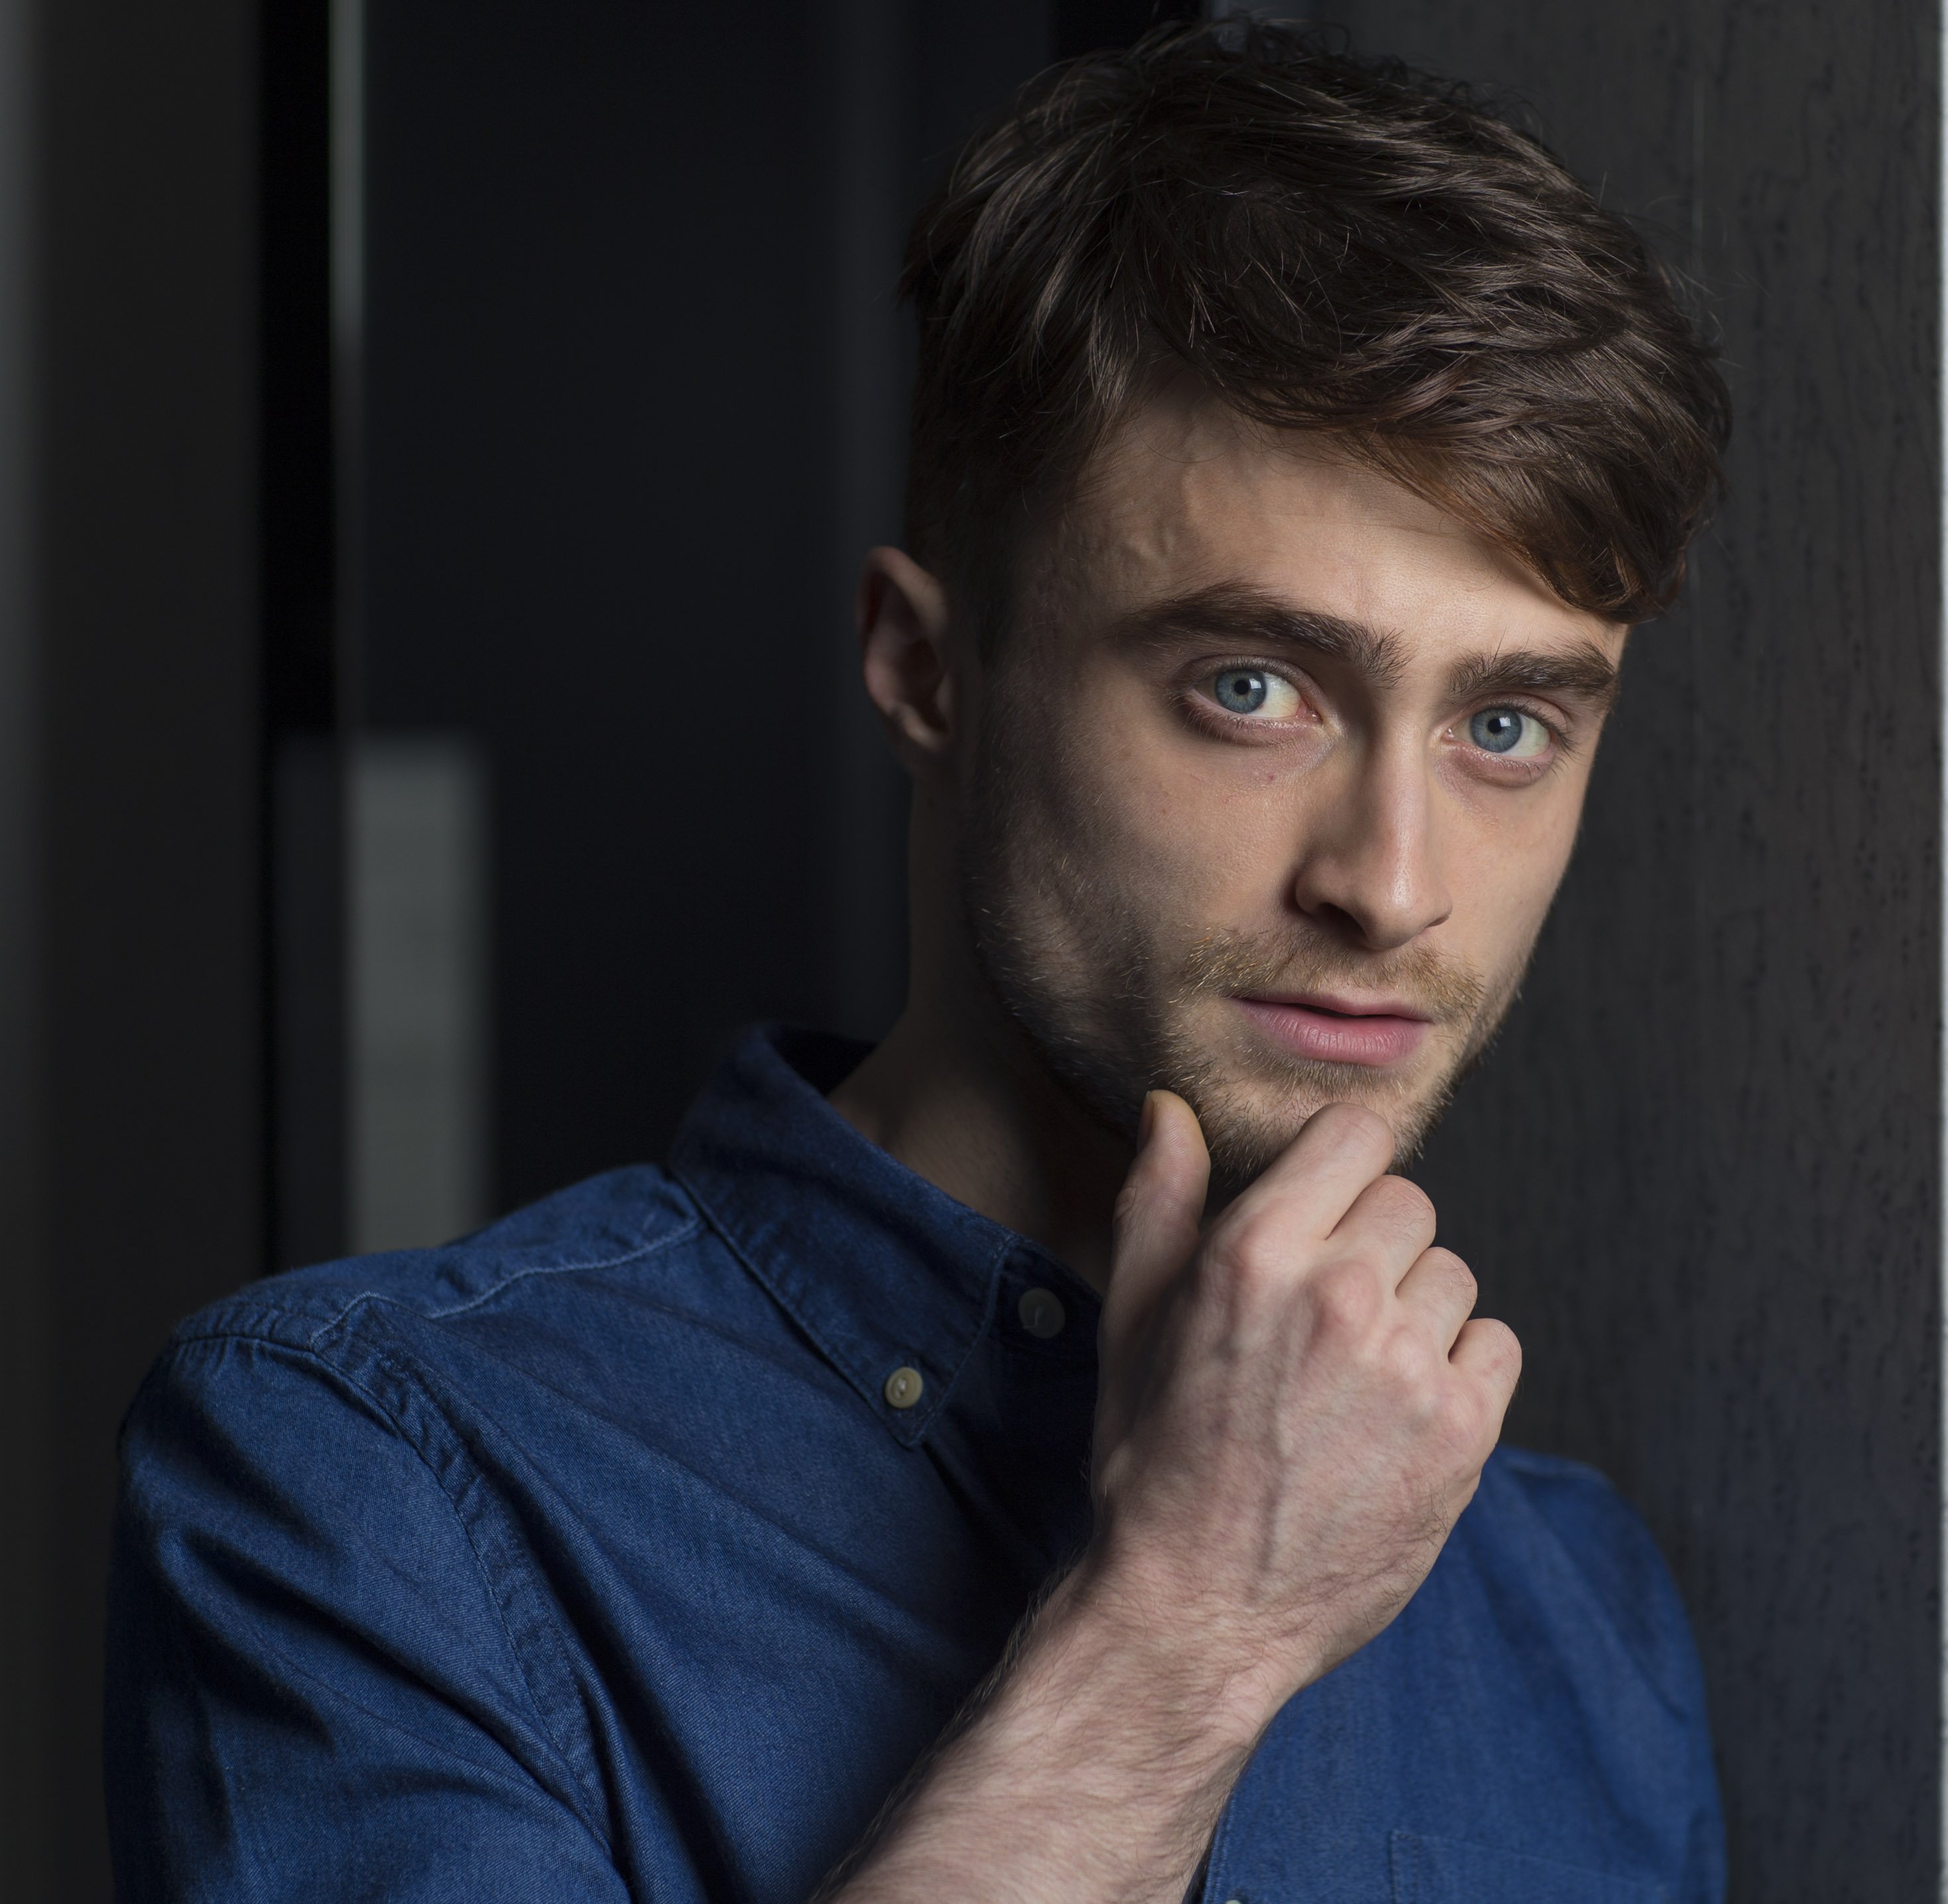 Daniel Radcliffe in Toronto promoting his movie What if? on July 23, 2014. (Chris So—Toronto Star/Getty Images)